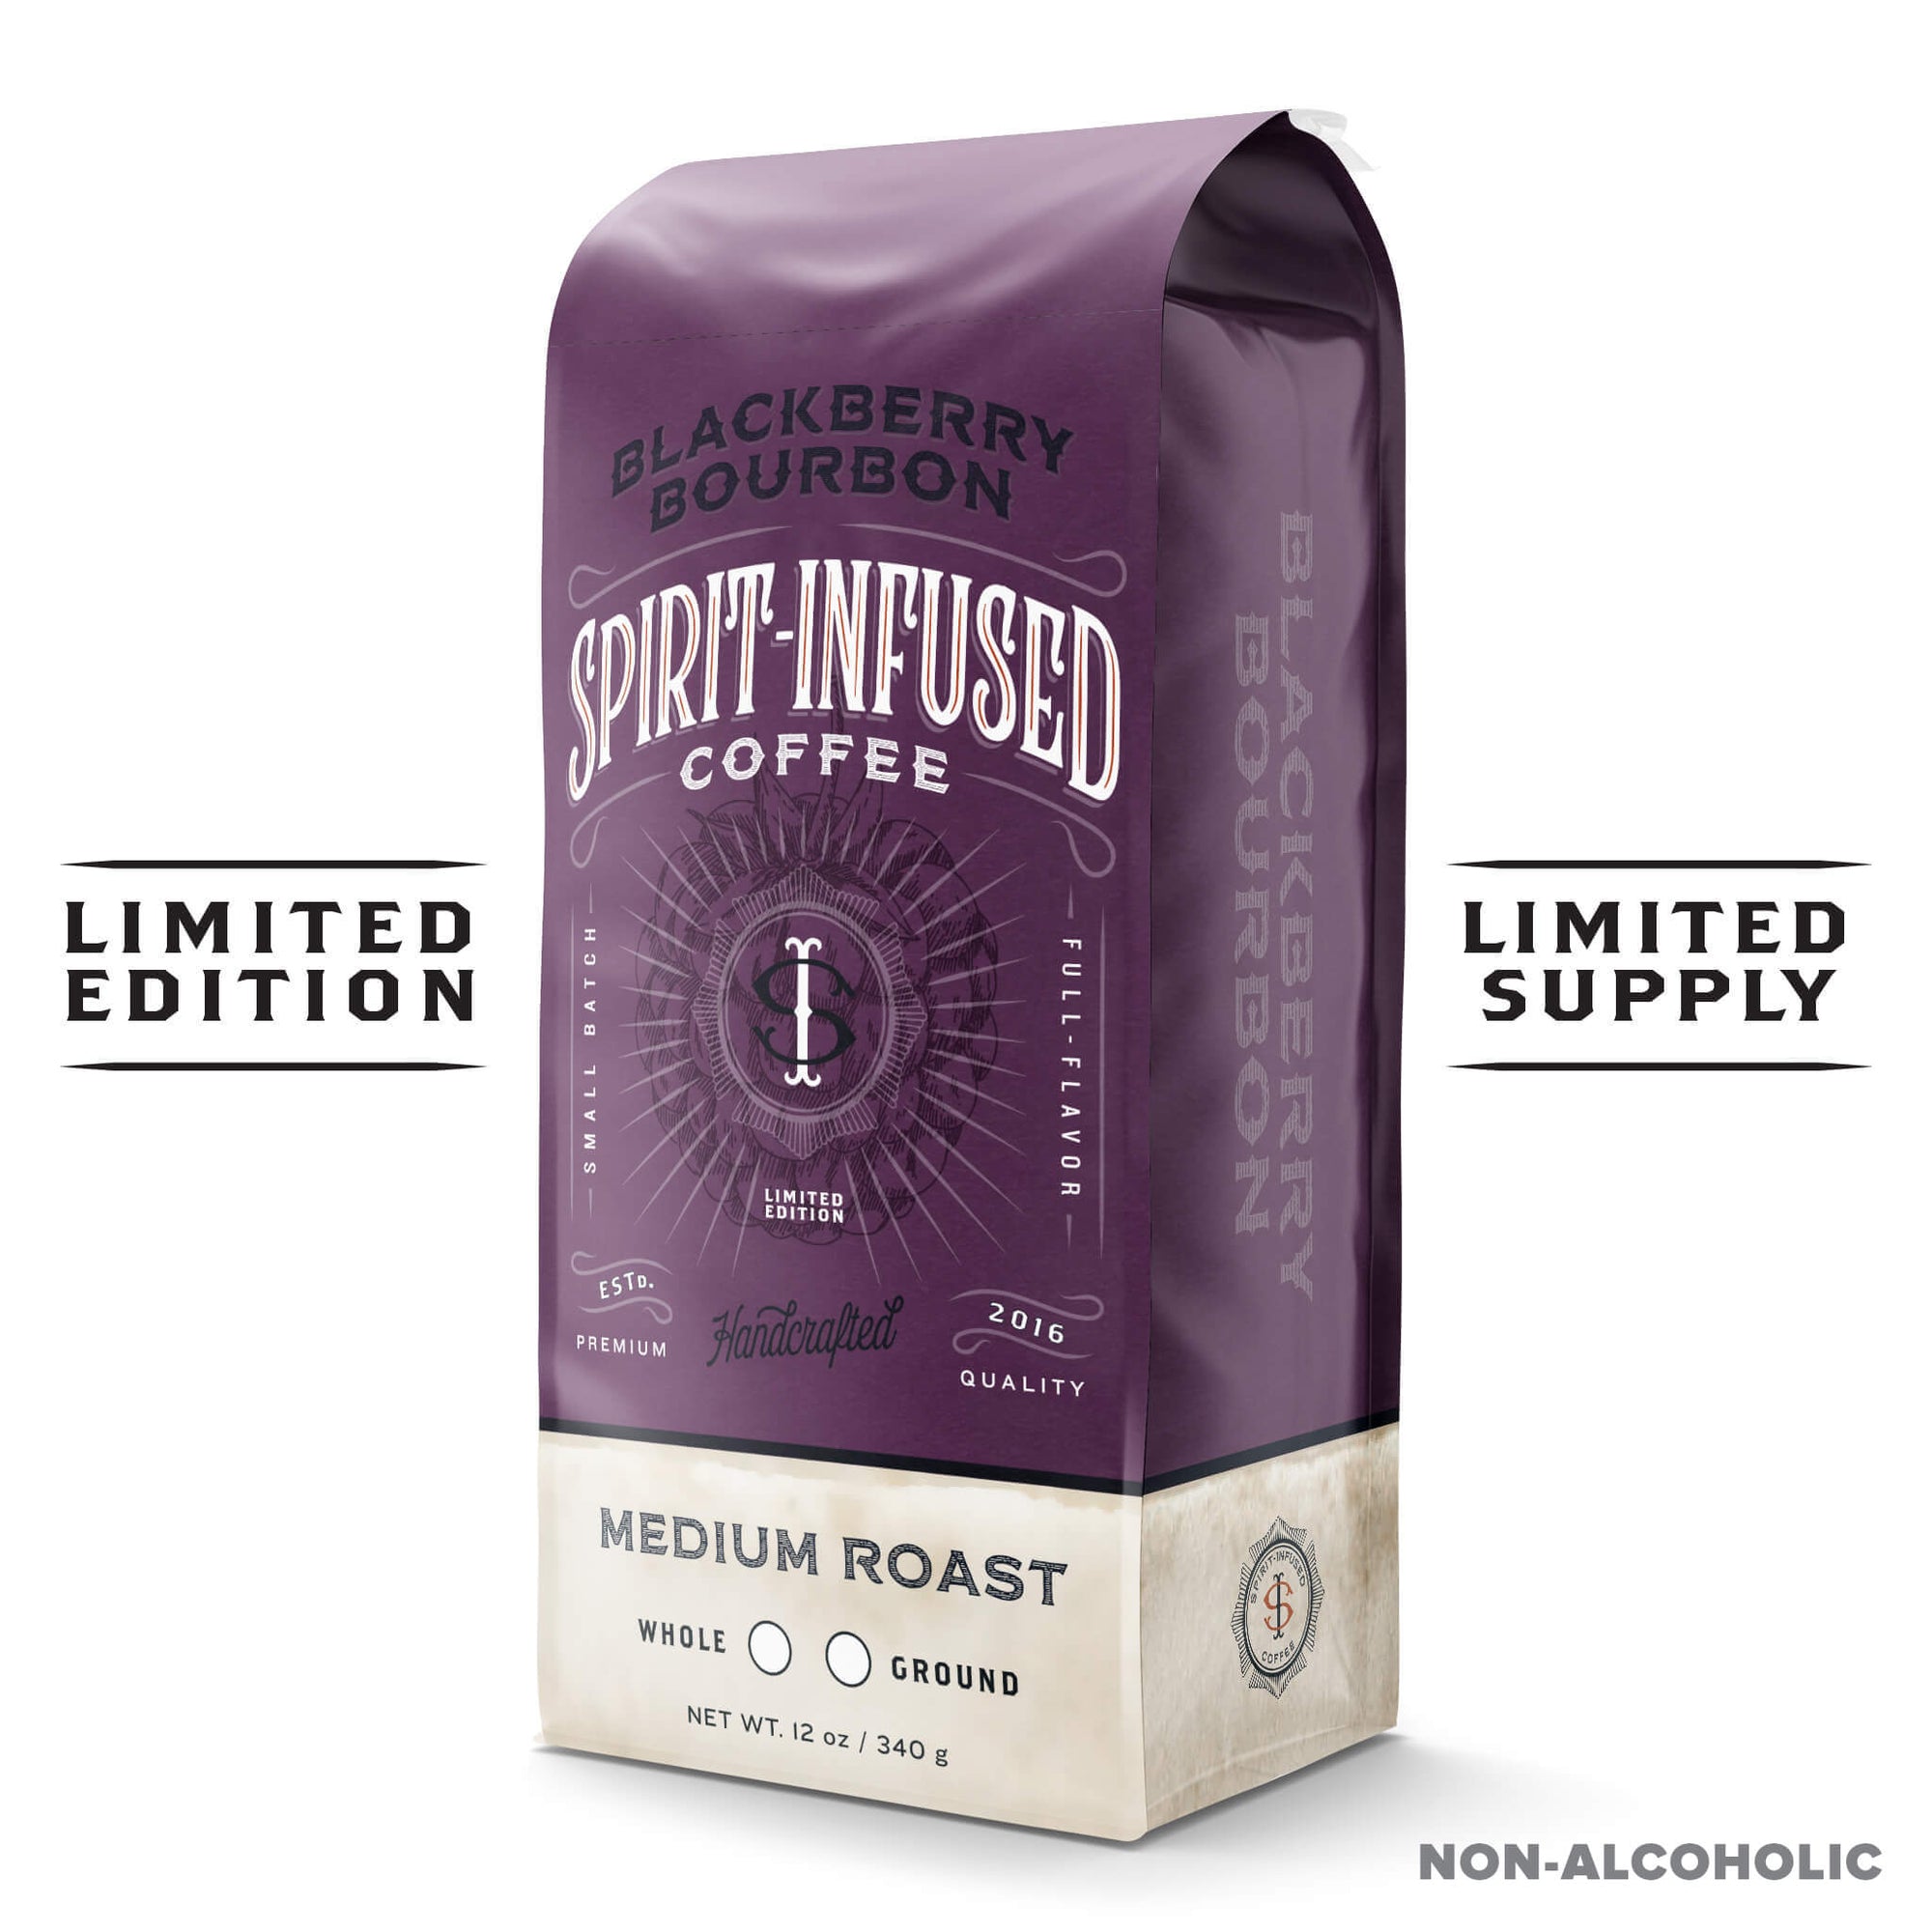 Fire Dept. Coffee's 12 ounce Blackberry Bourbon Infused Coffee package in a rectangular package. "Limited Edition" is to the left of the bag and "Limited Supply" is to the right of the bag. Non alcoholic stamp is in the bottom right corner.